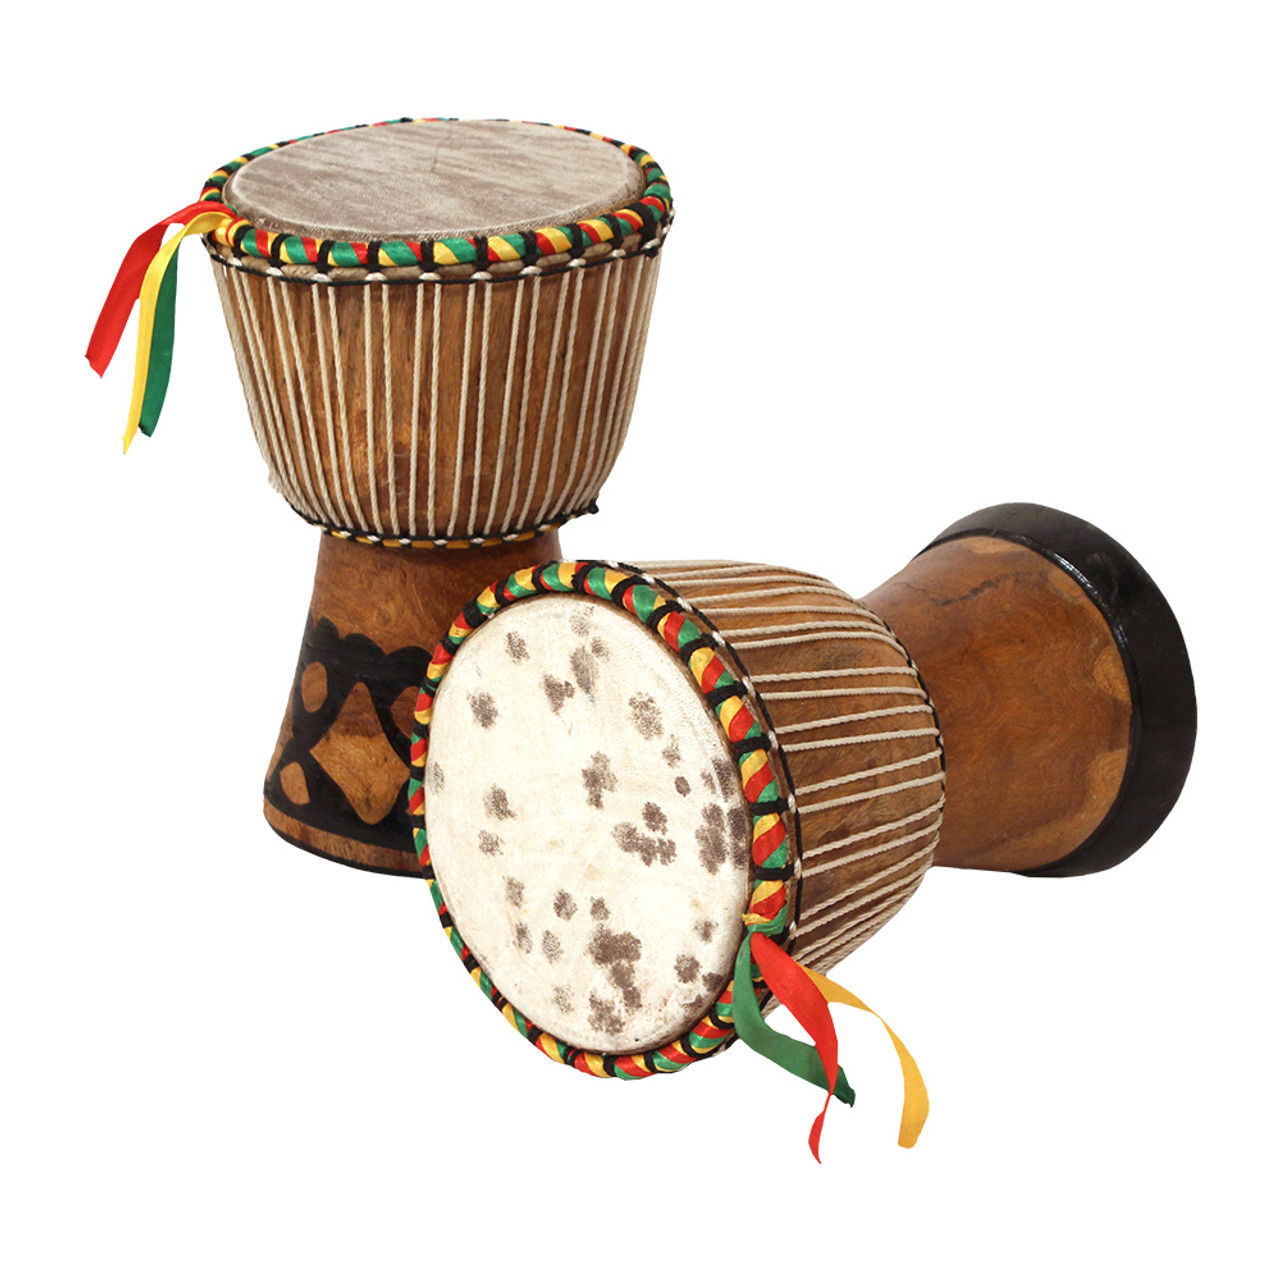 D'Jembe Drum: Small 10-12"